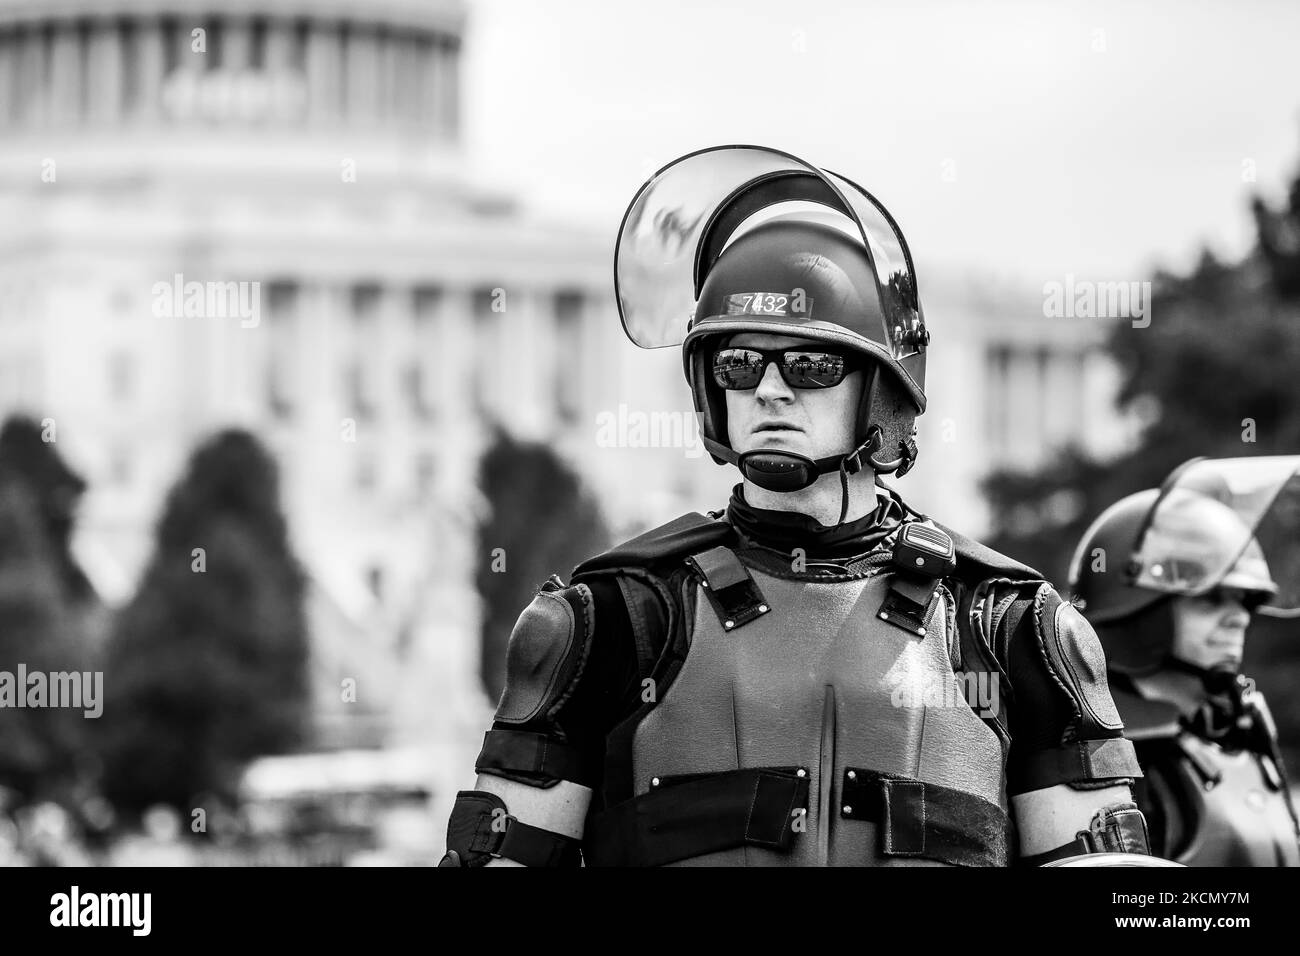 A Capitol Police officer in riot gear is one of hundreds guarding the US Capitol during the Justice for J6 rally hosted by Look Ahead America. The purpose of the rally is to protest detention of what they falsely claim are political prisoners - non-violent protesters charged with crimes committed during the January 6 insurrection. In addition to the event at the Capitol, rallies are taking place in 17 state capitals. (Photo by Allison Bailey/NurPhoto) Stock Photo